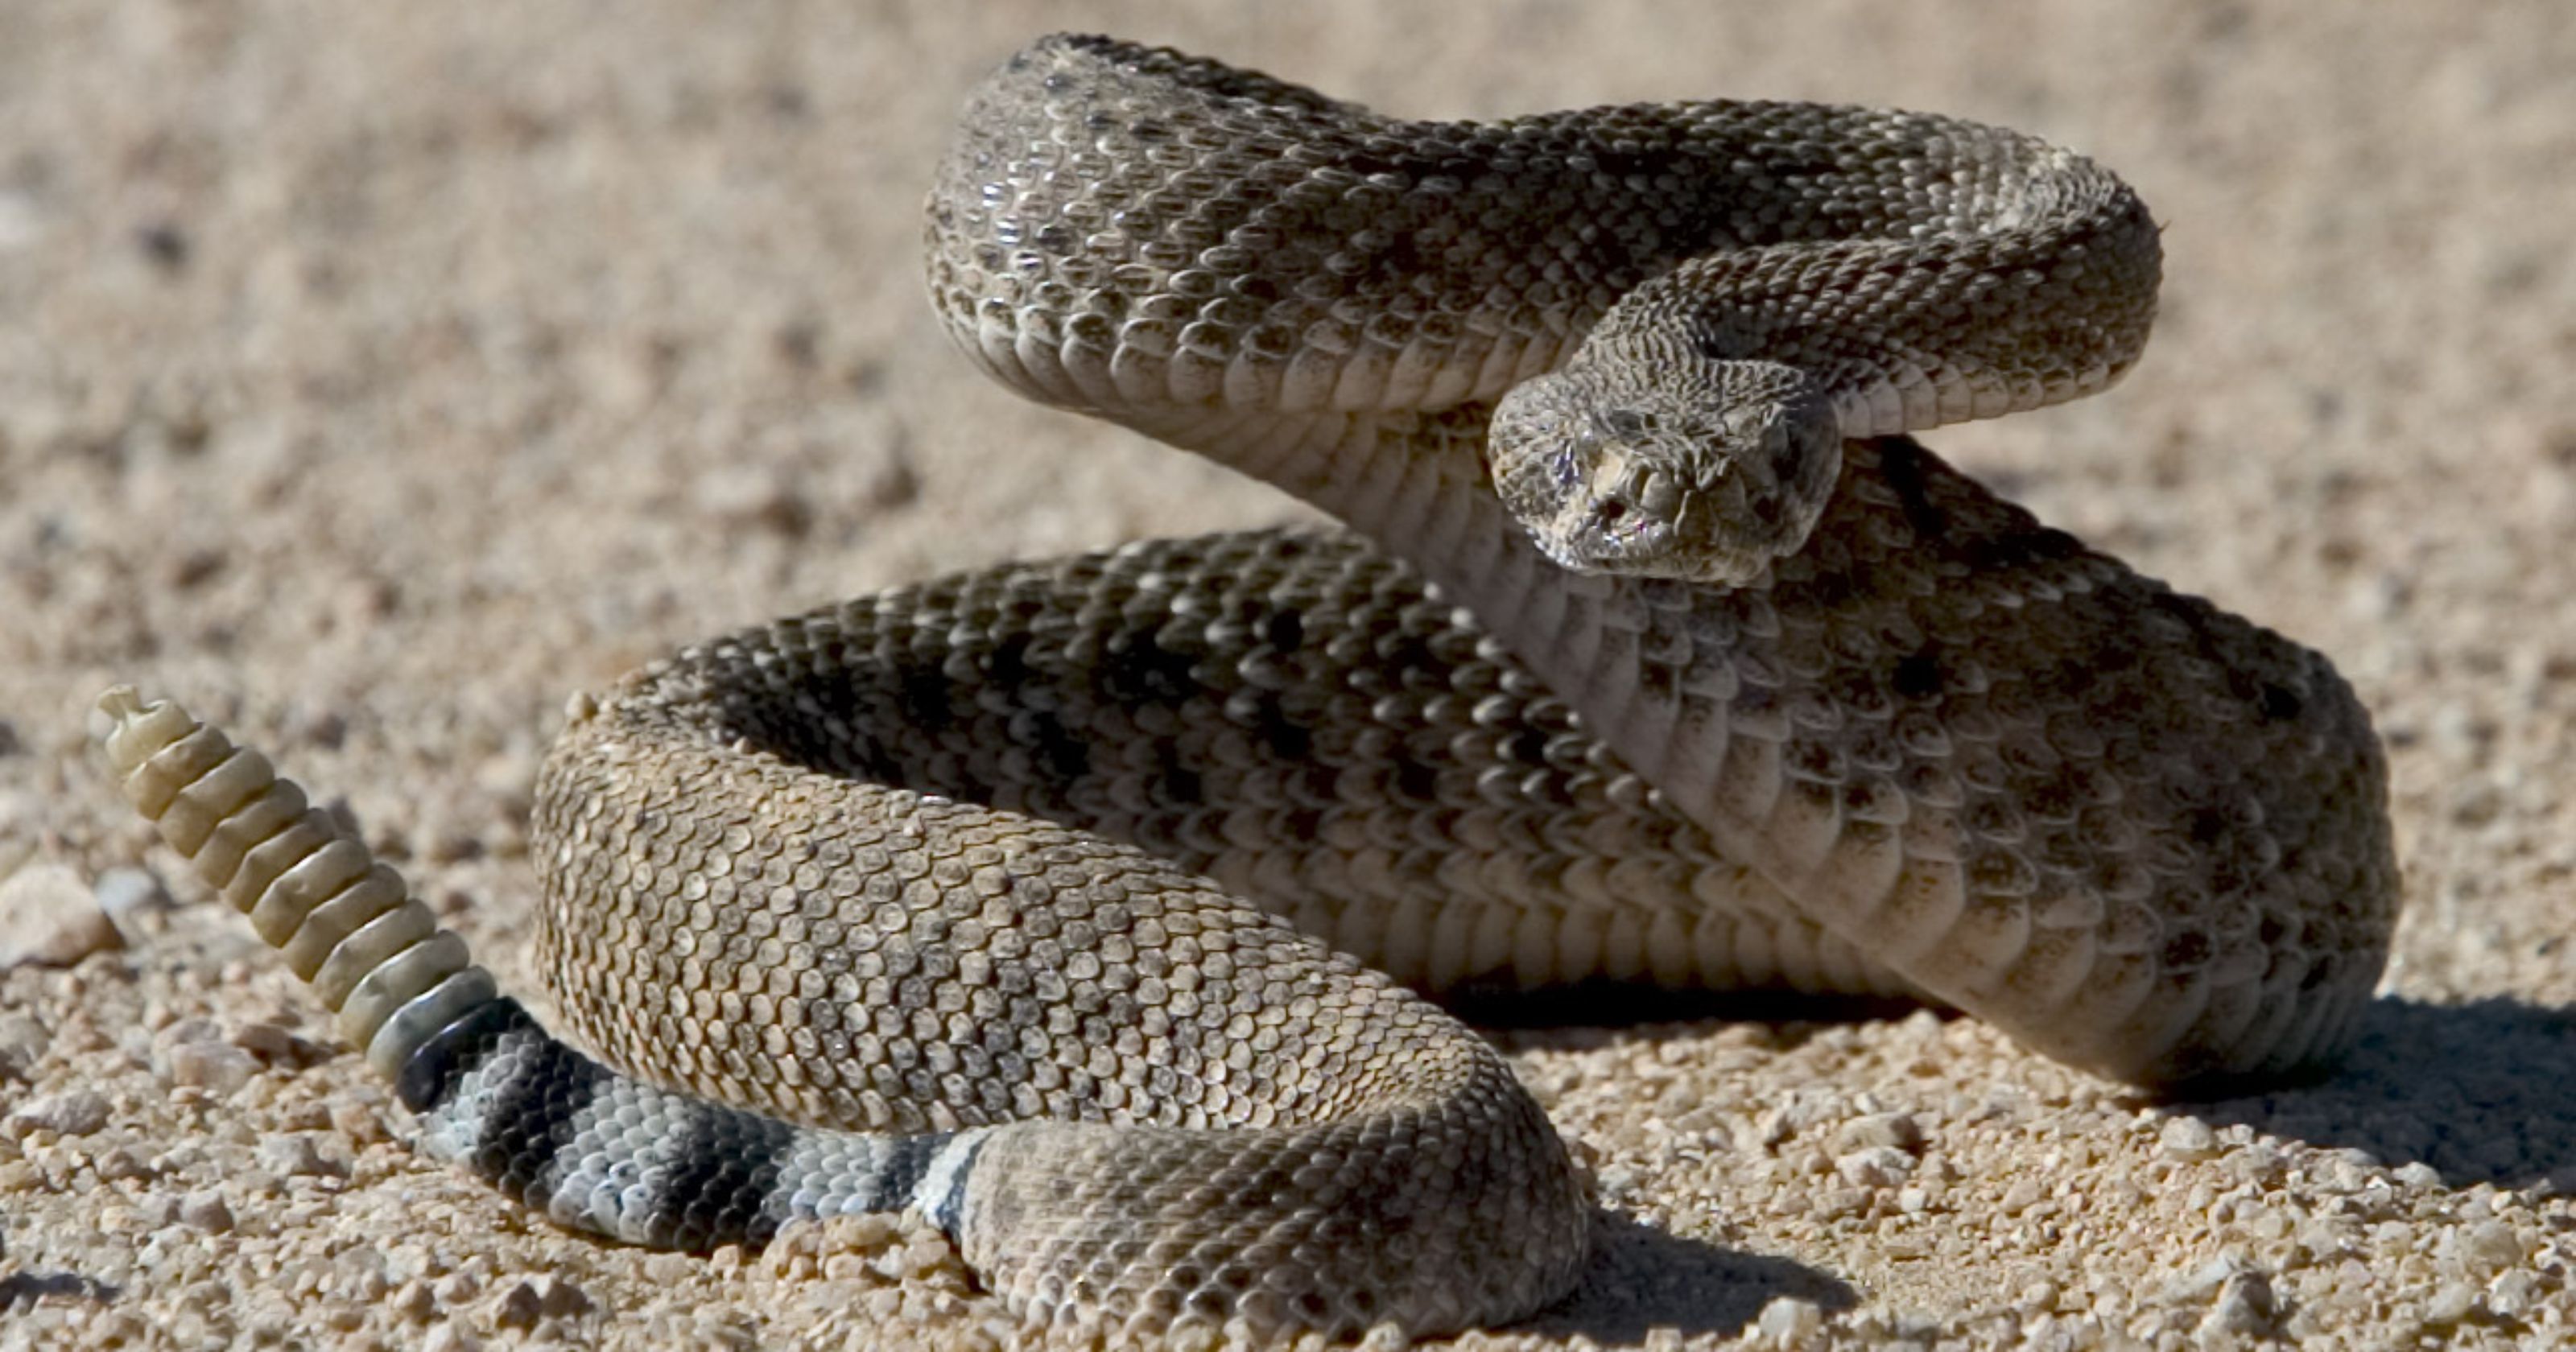 Rattlesnakes are waking up, coming out in Phoenix